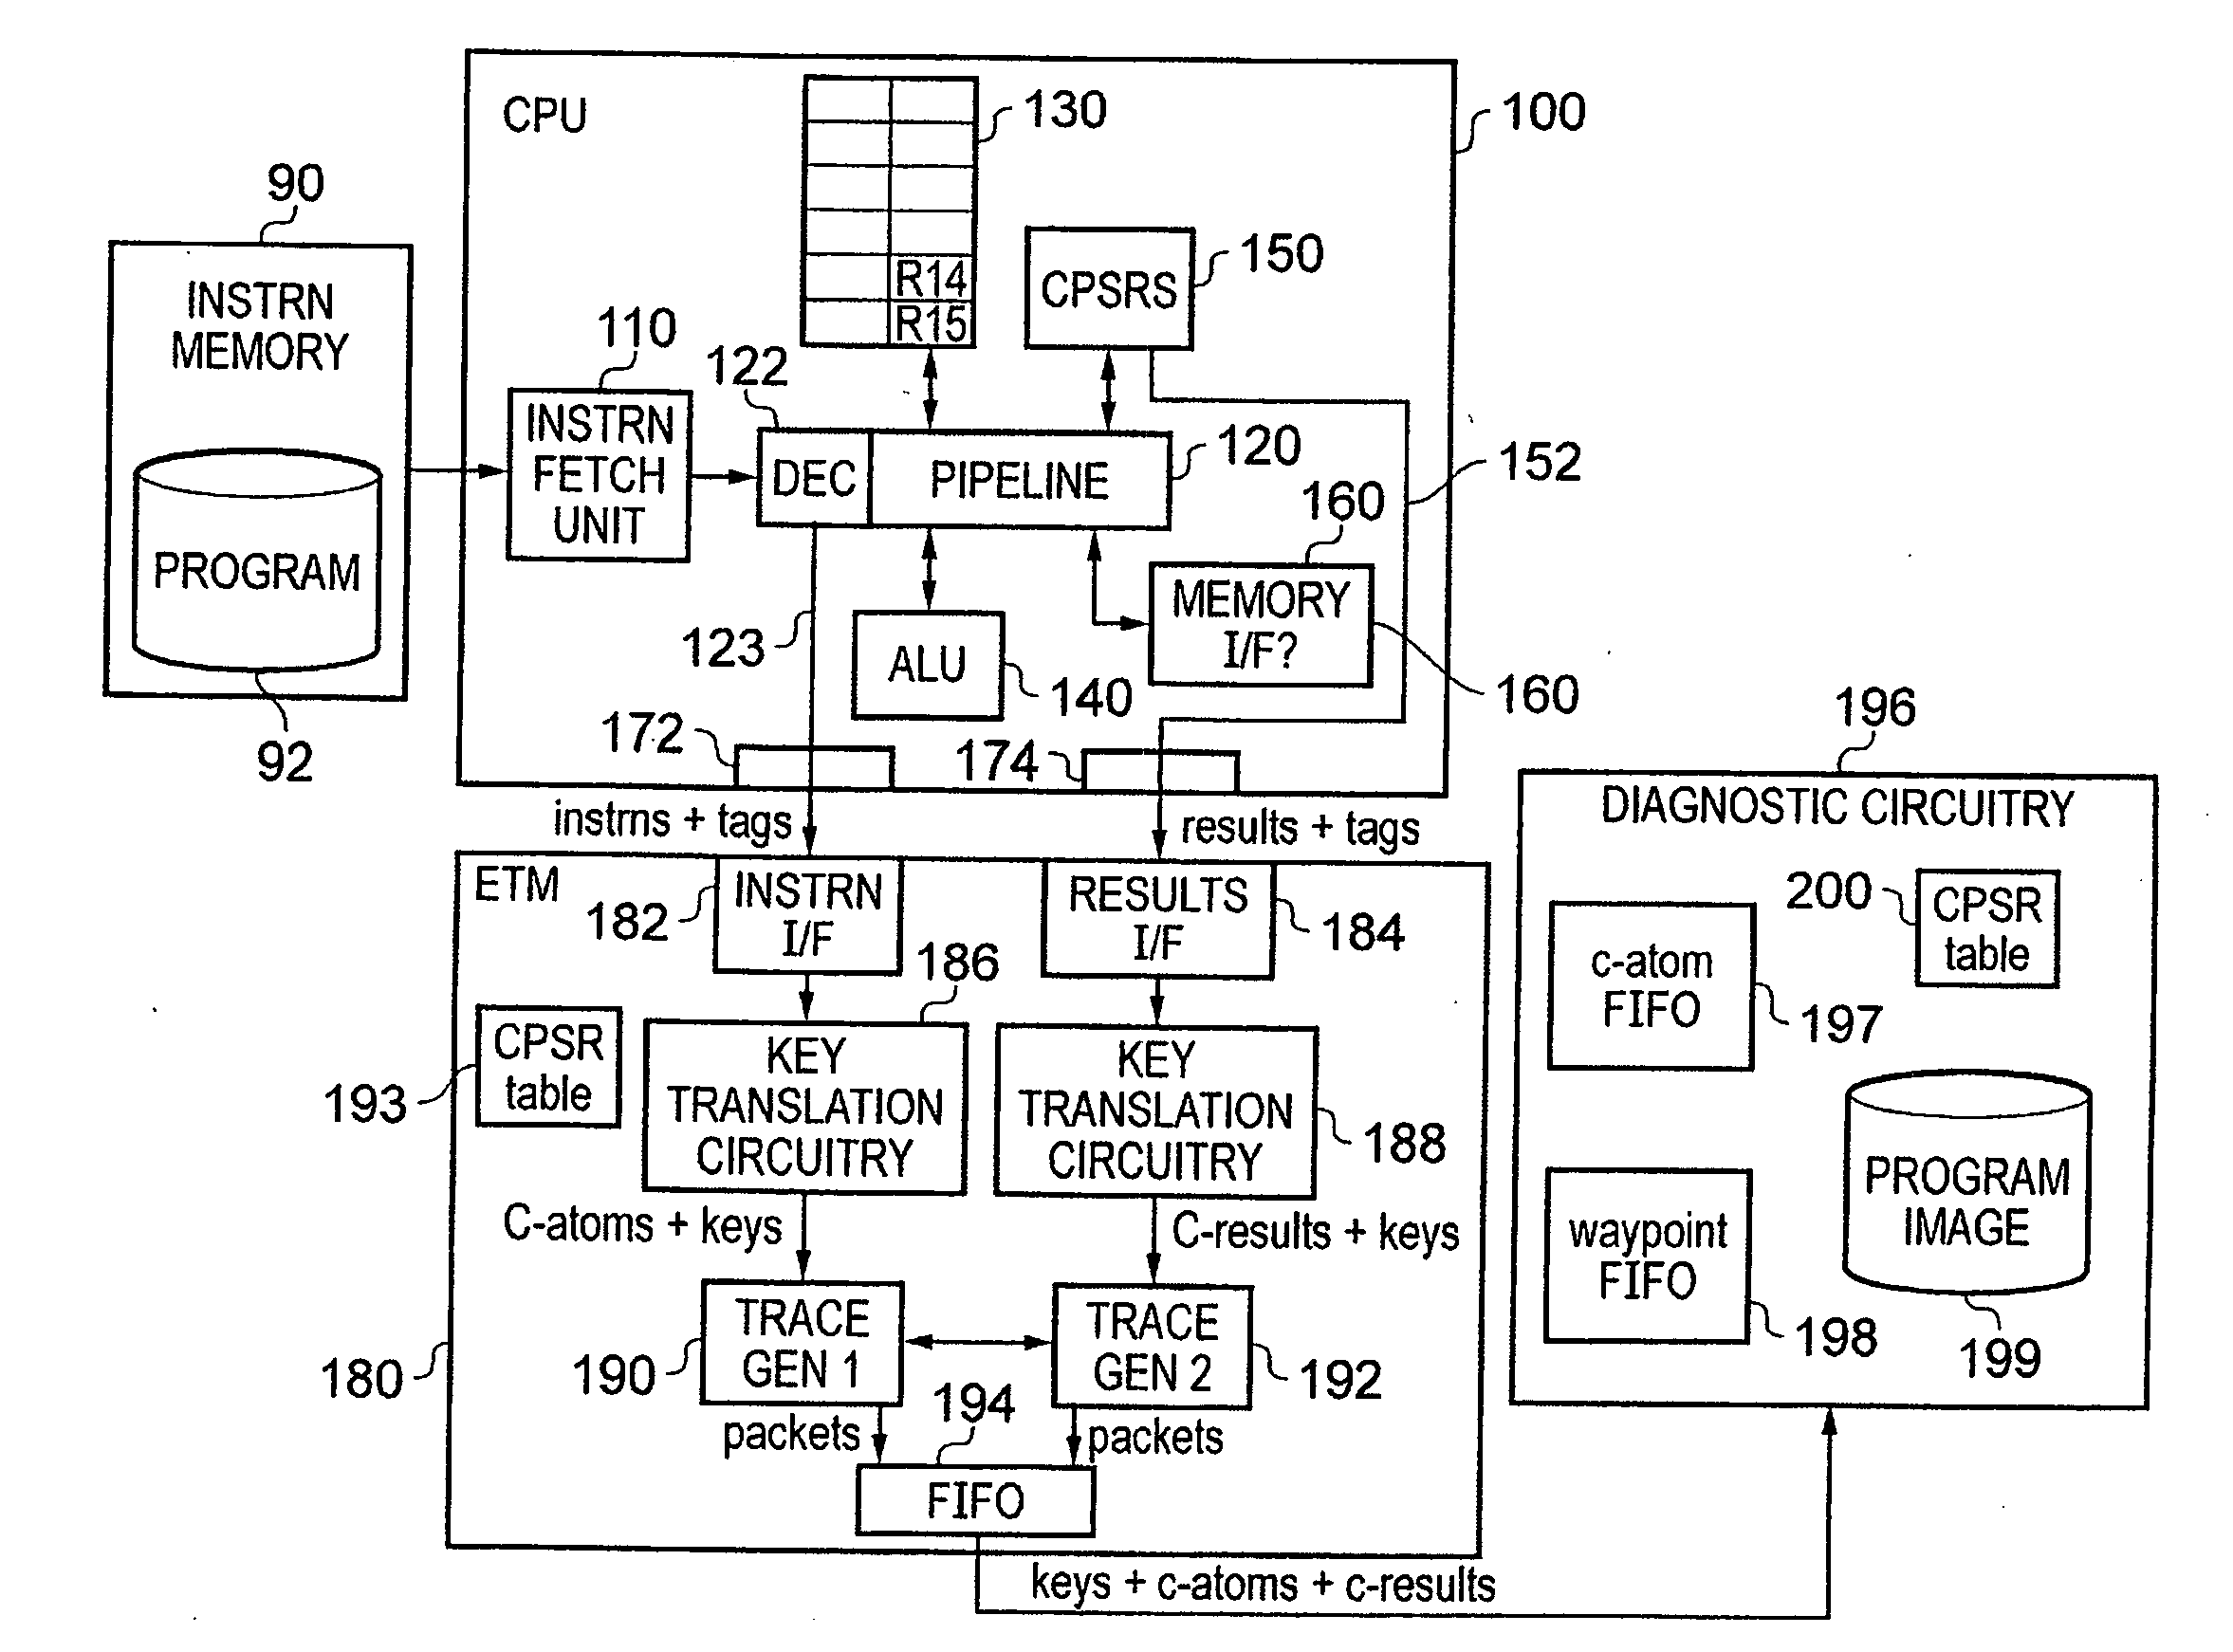 Tracing of a data processing apparatus